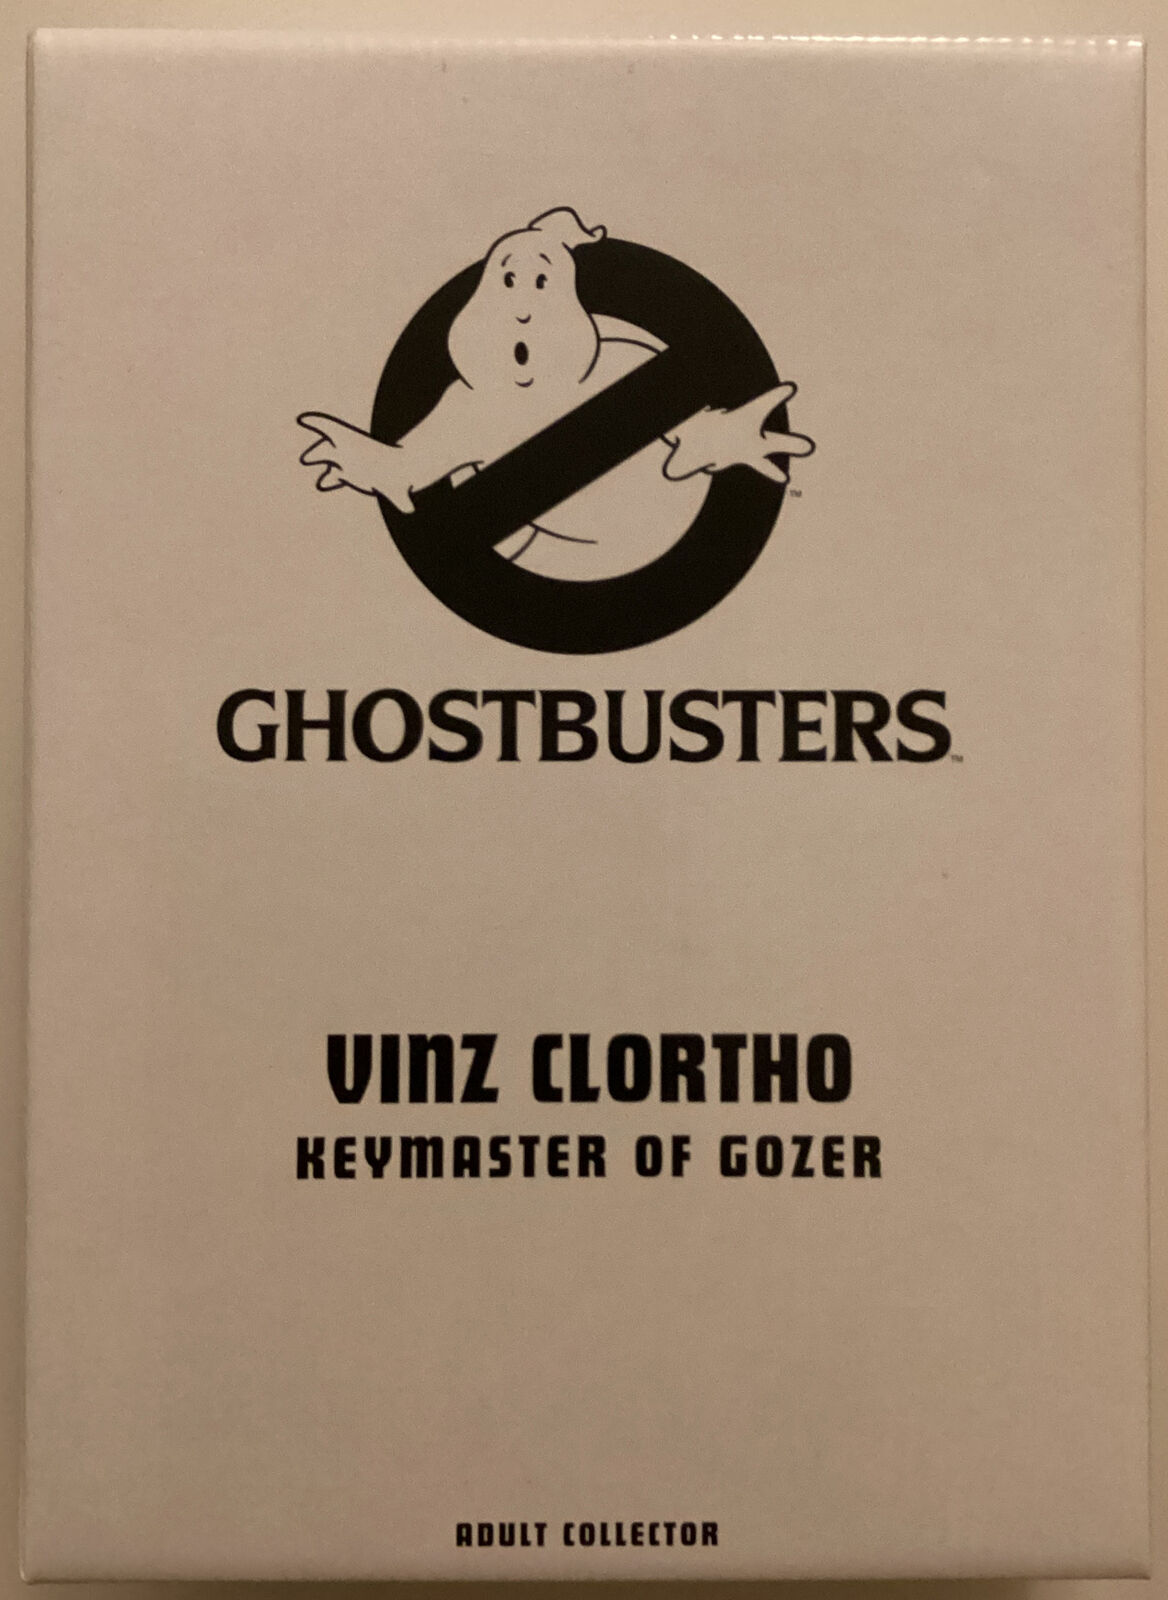 Ghostbusters 6 Inch Action Figure Exclusive - Vinz Clortho Sealed In Mailer